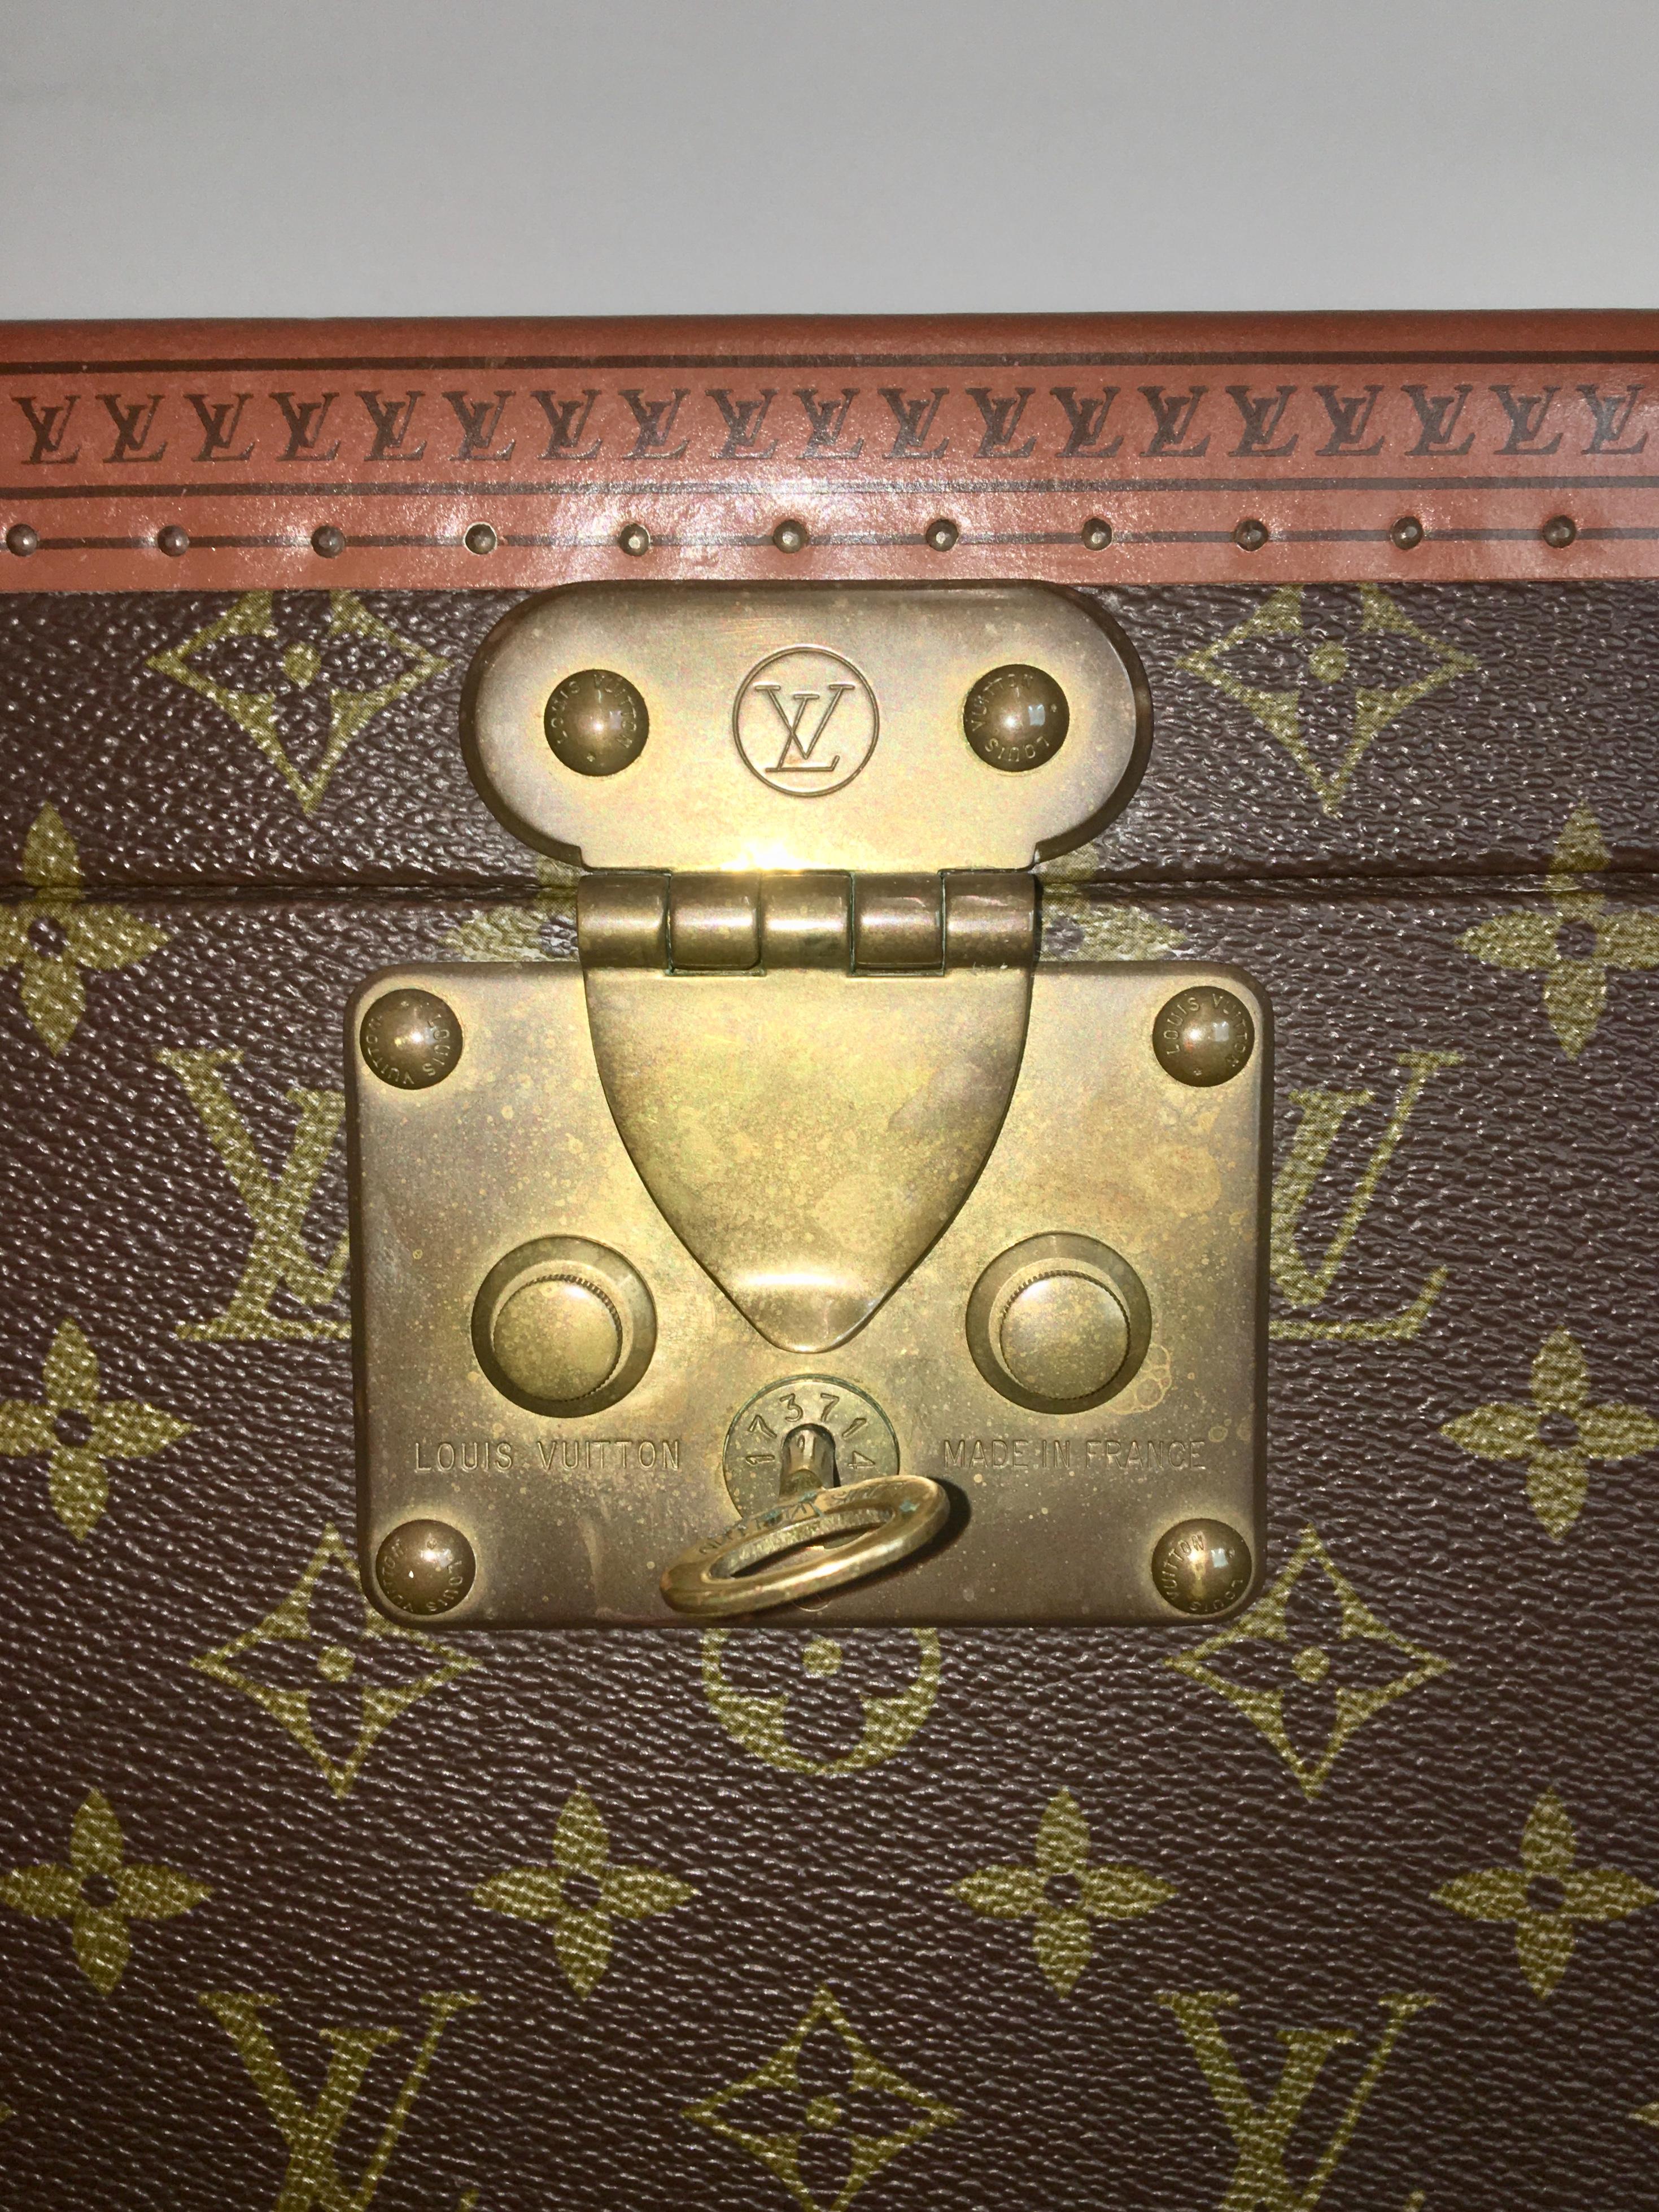 LOUIS VUITTON Boite Flacons beauty trunk case. 
Product Features: Monogram canvas, Golden brass pieces and reinforced corners, S-lock closure, mirror, washable lining, Hand-finished with brass nail heads.
Serial number : 936921

Measurements: